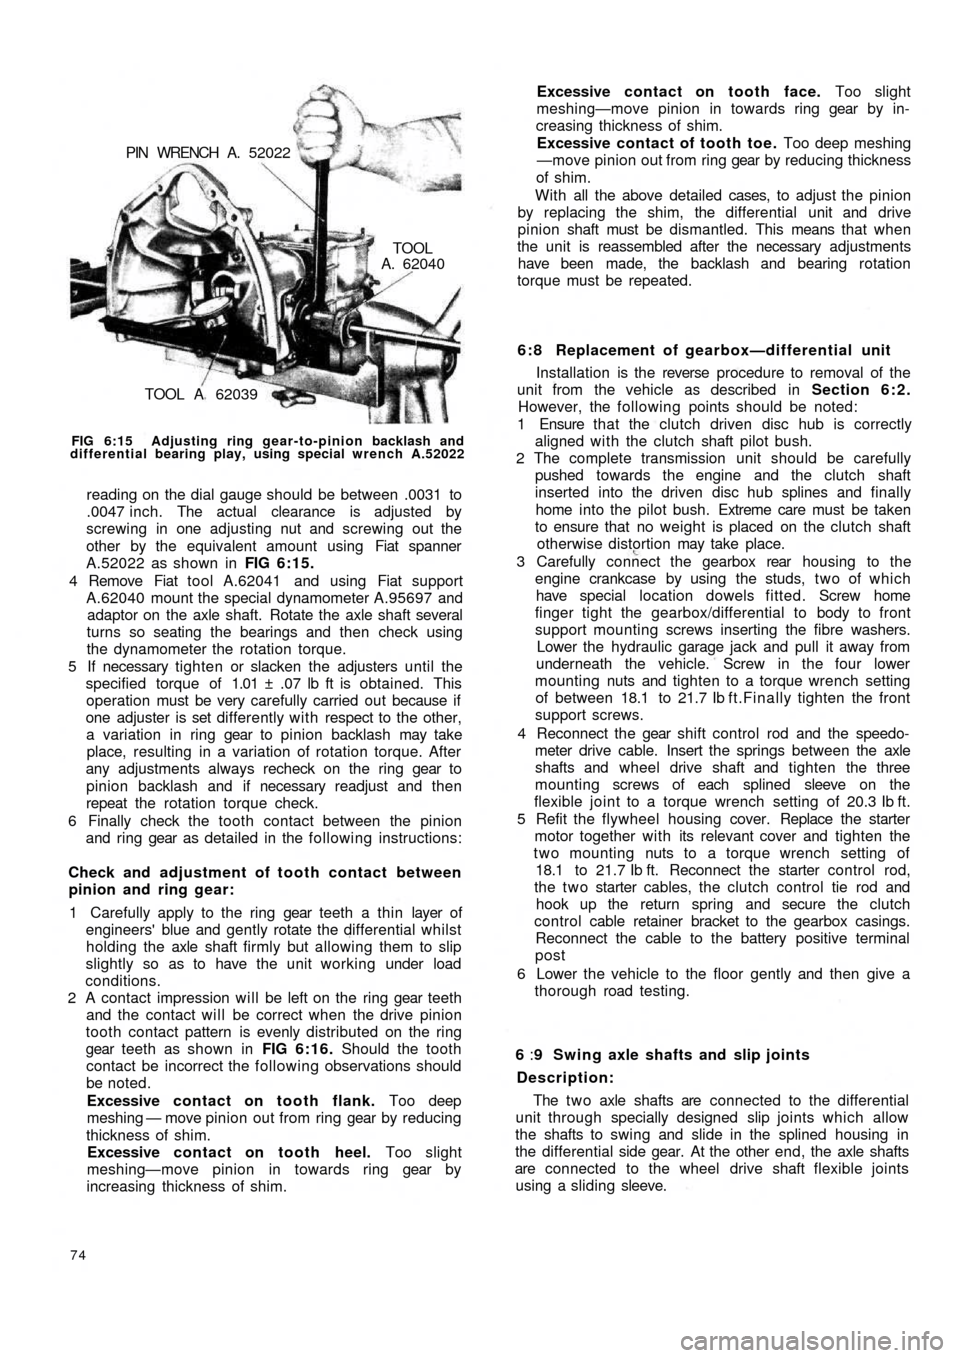 FIAT 500 1969 1.G Workshop Manual TOOL A  62039
TOOLA. 62040 PIN  WRENCH  A.  52022
FIG 6:15  Adjusting ring gear-to-pinion backlash and
differential bearing play, using special wrench A.52022
reading on the dial gauge should be betwe